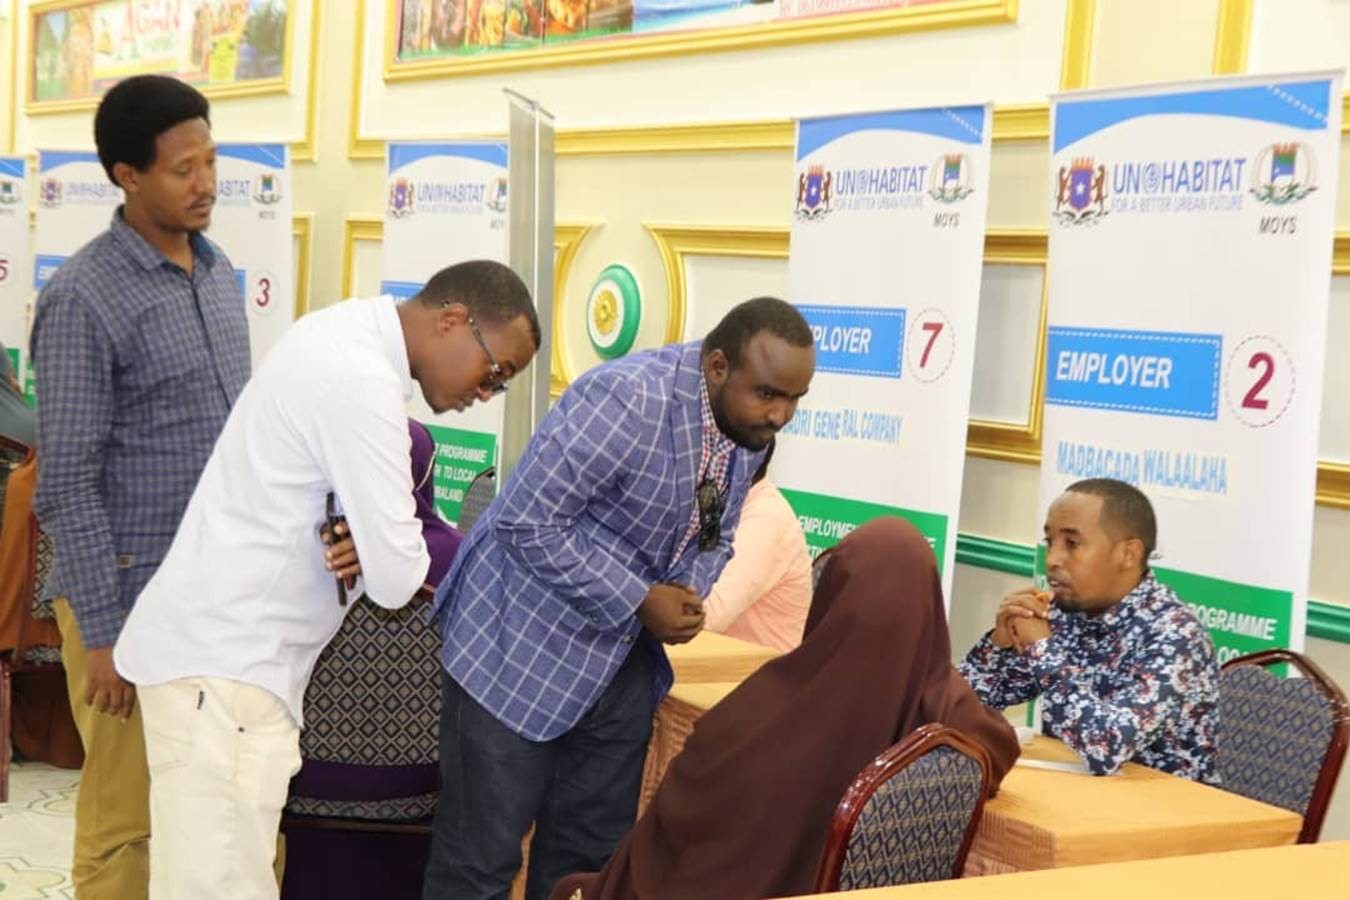 Ministry of Youth and Sports Director General Abdirahman Abdi Ahmed encouraging youth to maximize the opportunity offered by the job fair